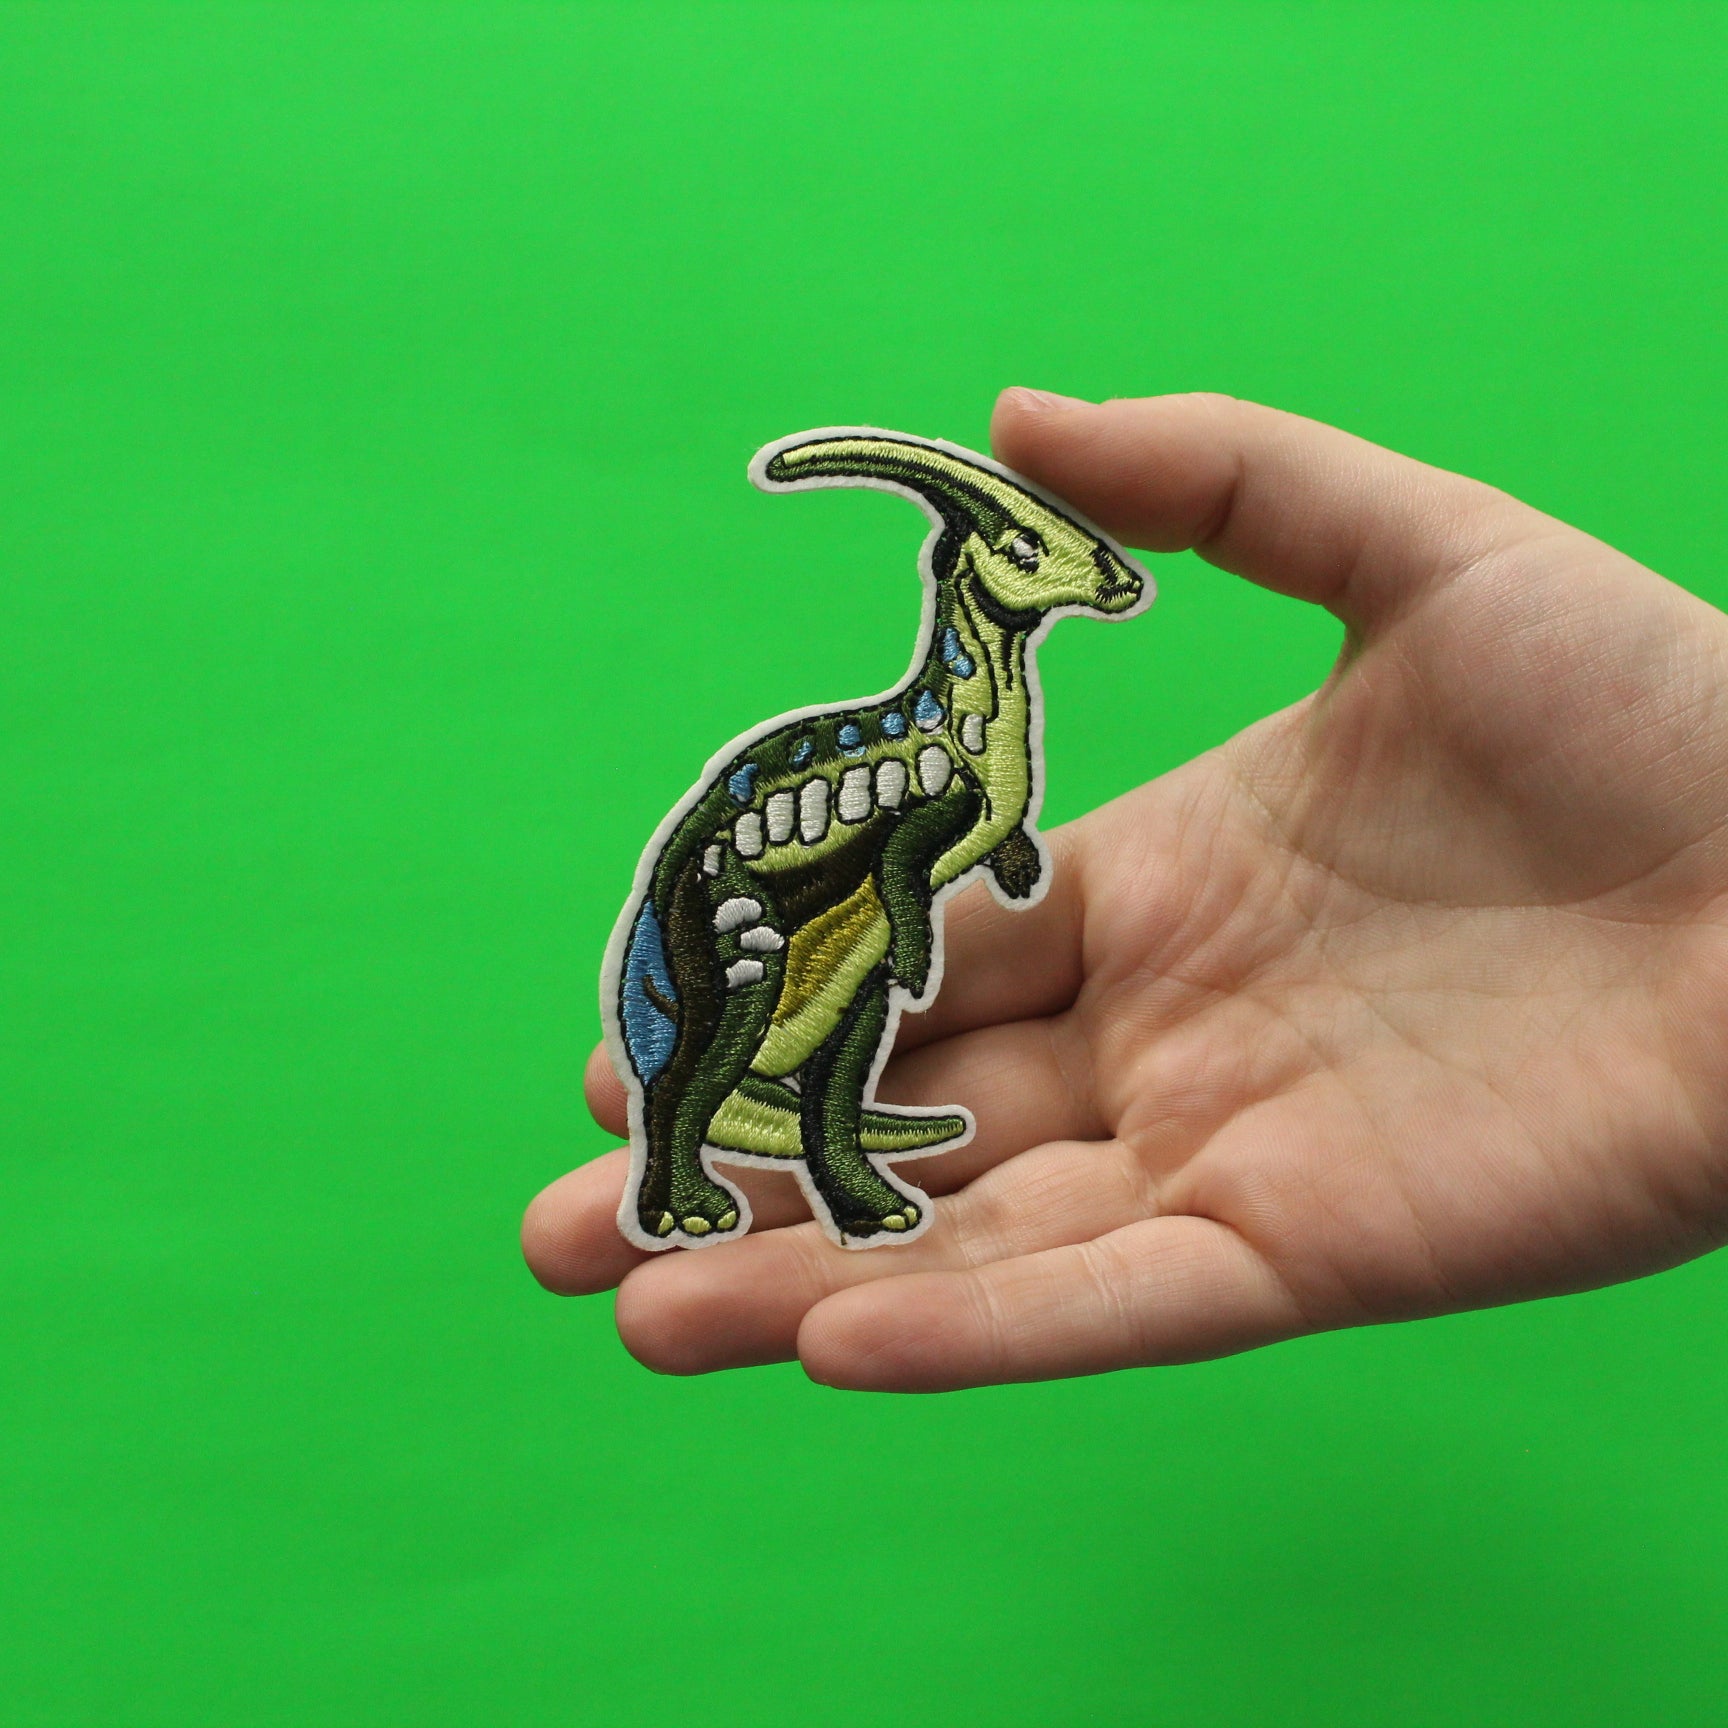 Parasaurolophus Green and Blue Standing Dinosaur Embroidered Iron on Patch 